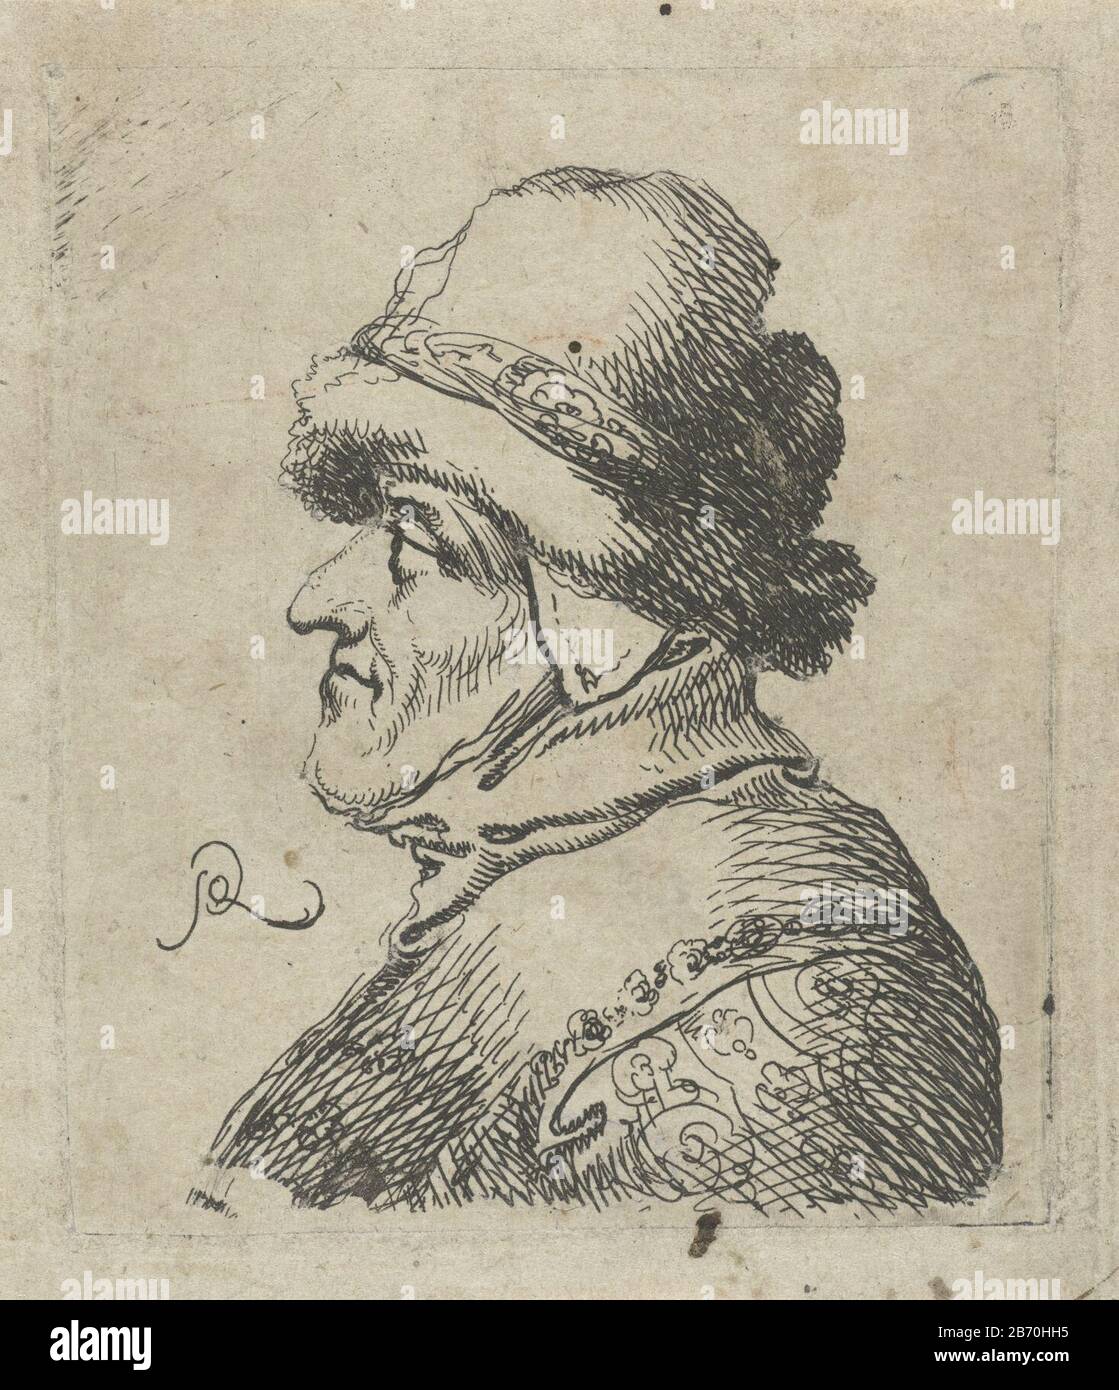 Kop van een oude man met muts Head of an old man with hat object type:  picture Item number: RP-P-1878-A-1493Catalogusreferentie: Hollstein Dutch  41 Inscriptions / Brands: collector's mark, verso, stamped: Lugt 2228